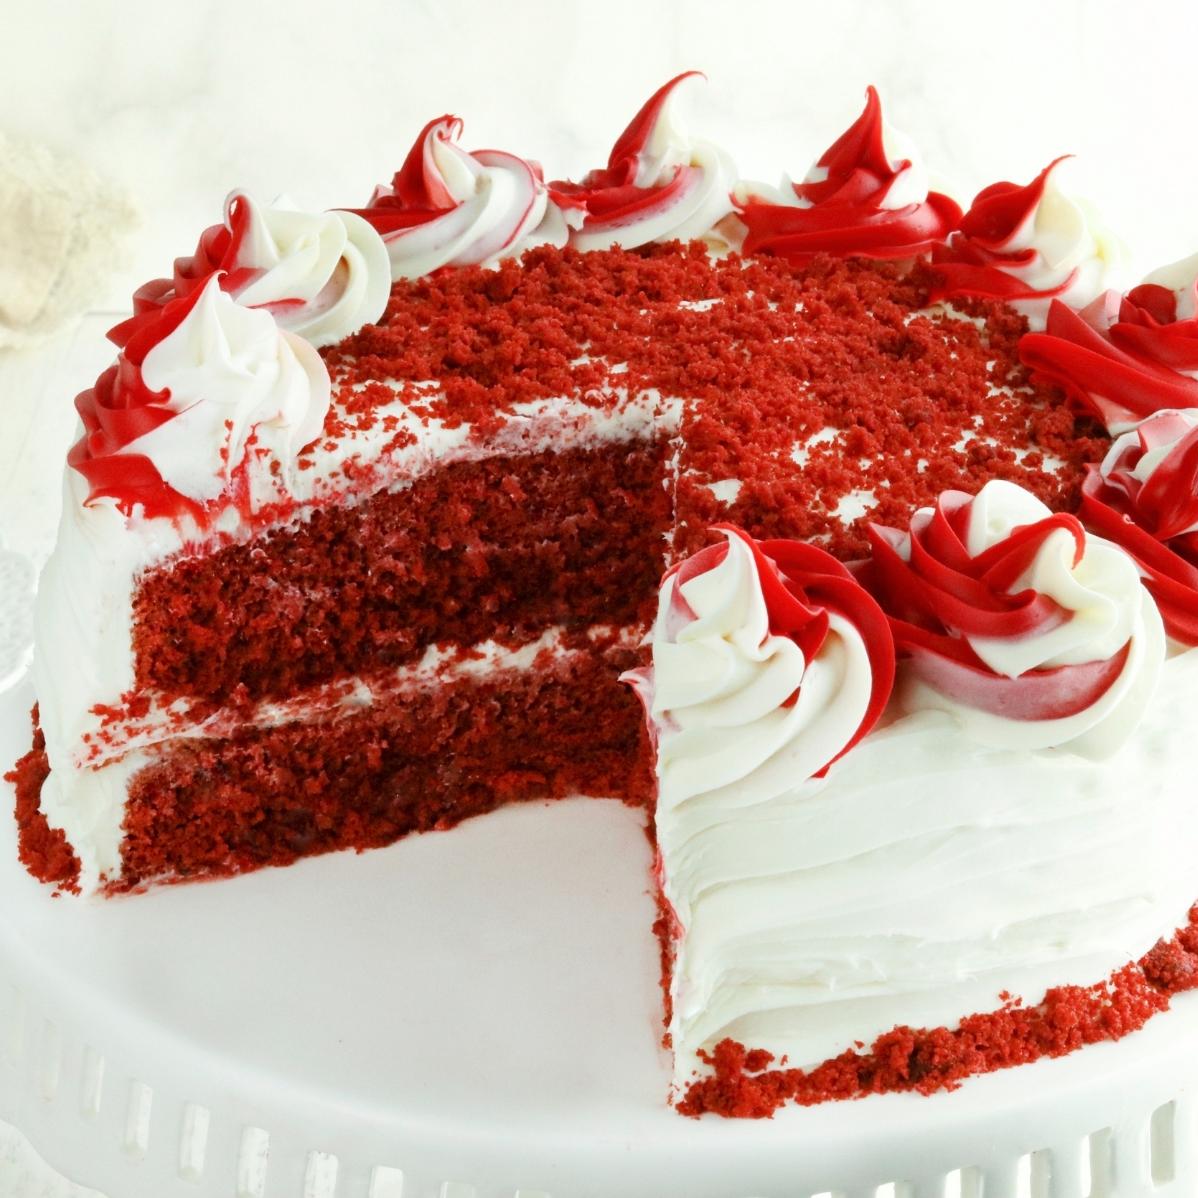  Nothing beats a classic red velvet cake with a twist